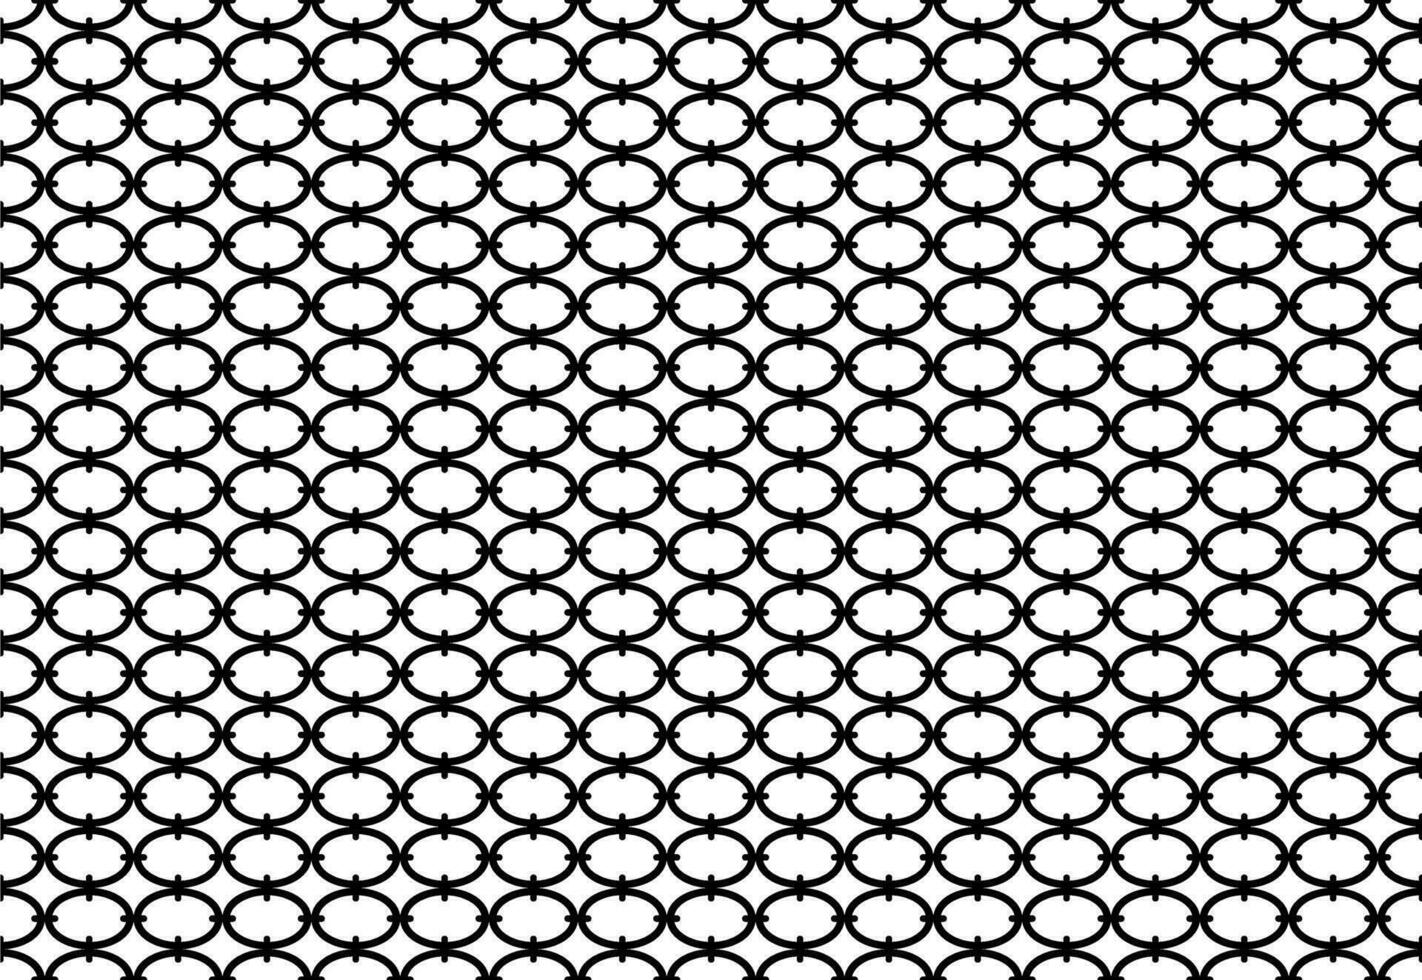 Oval Shaped Motifs Pattern, can use for Decoration, Ornate, Wallpaper, Background, Tile, Floor, Textile, Fabric, Fashion, Wrapping or Graphic Design Element. Vector Illustration